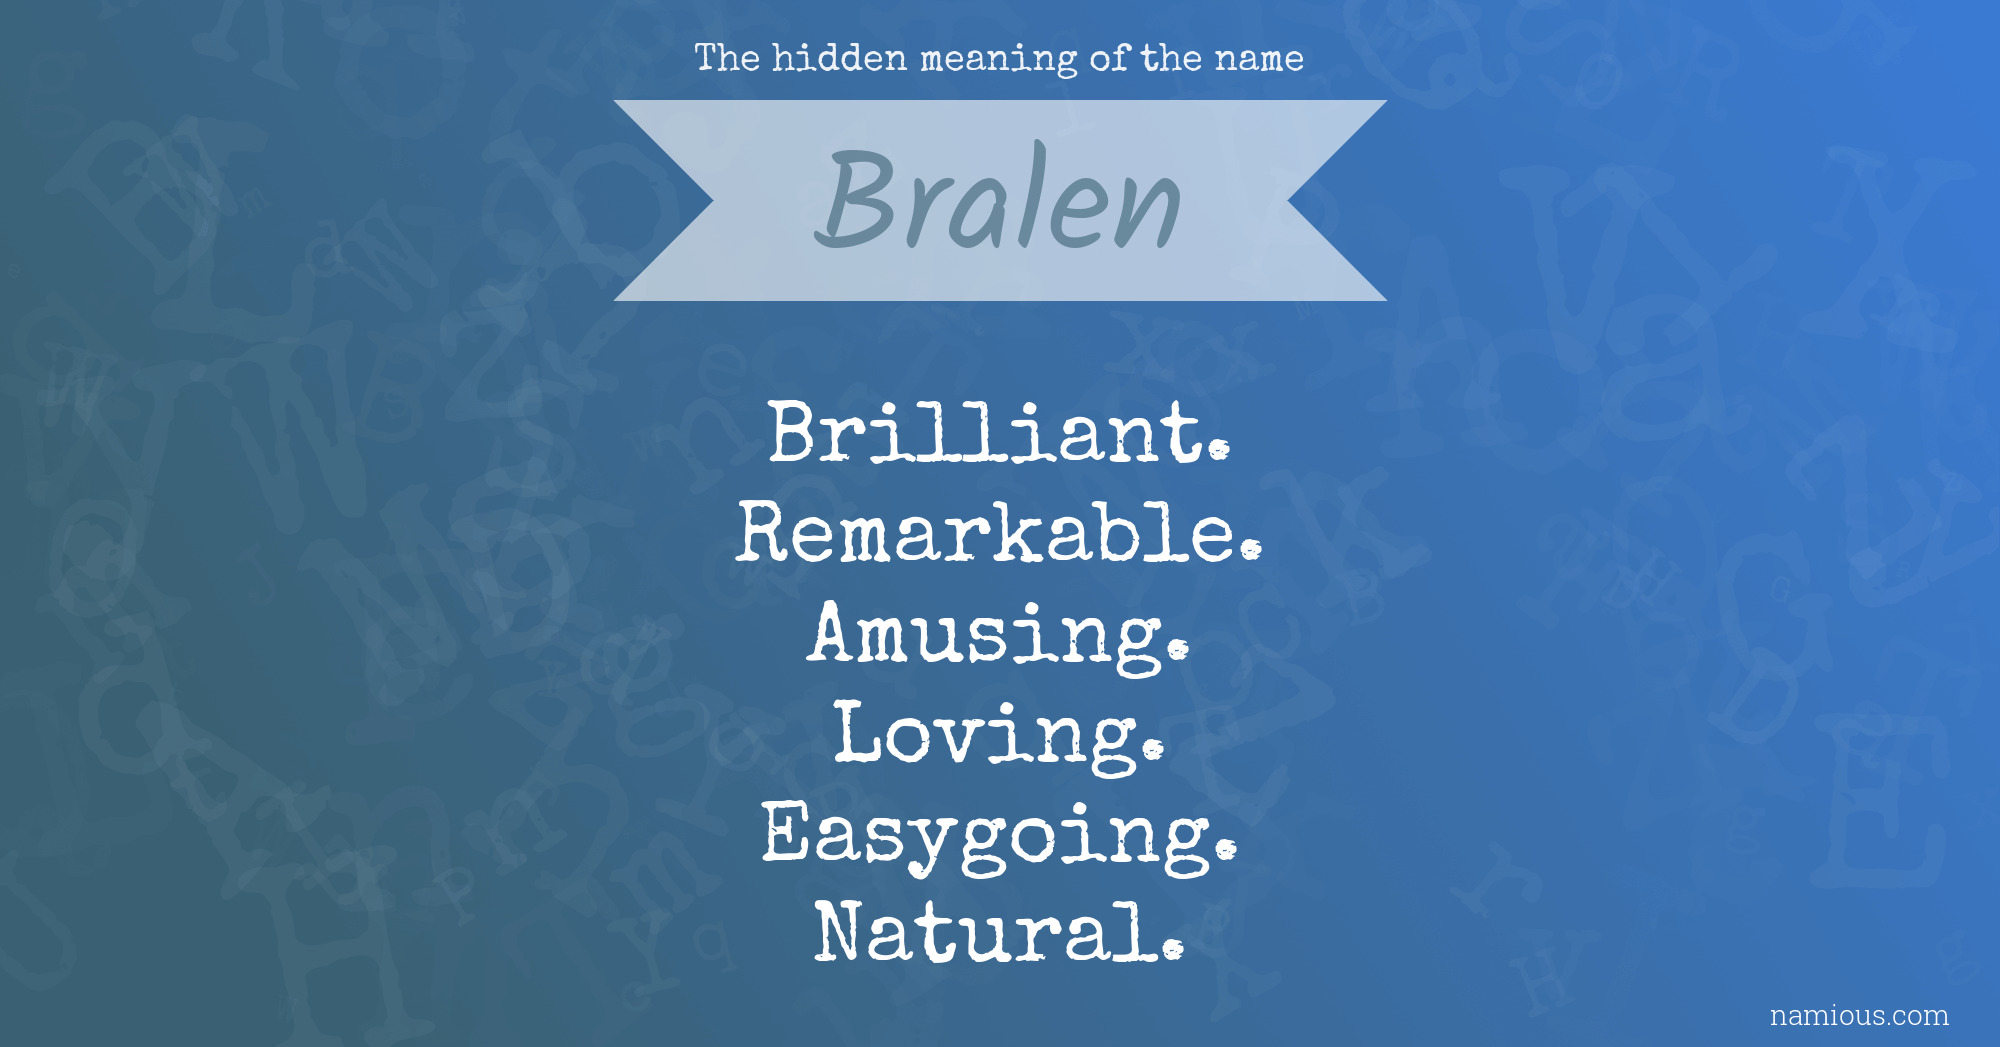 The hidden meaning of the name Bralen